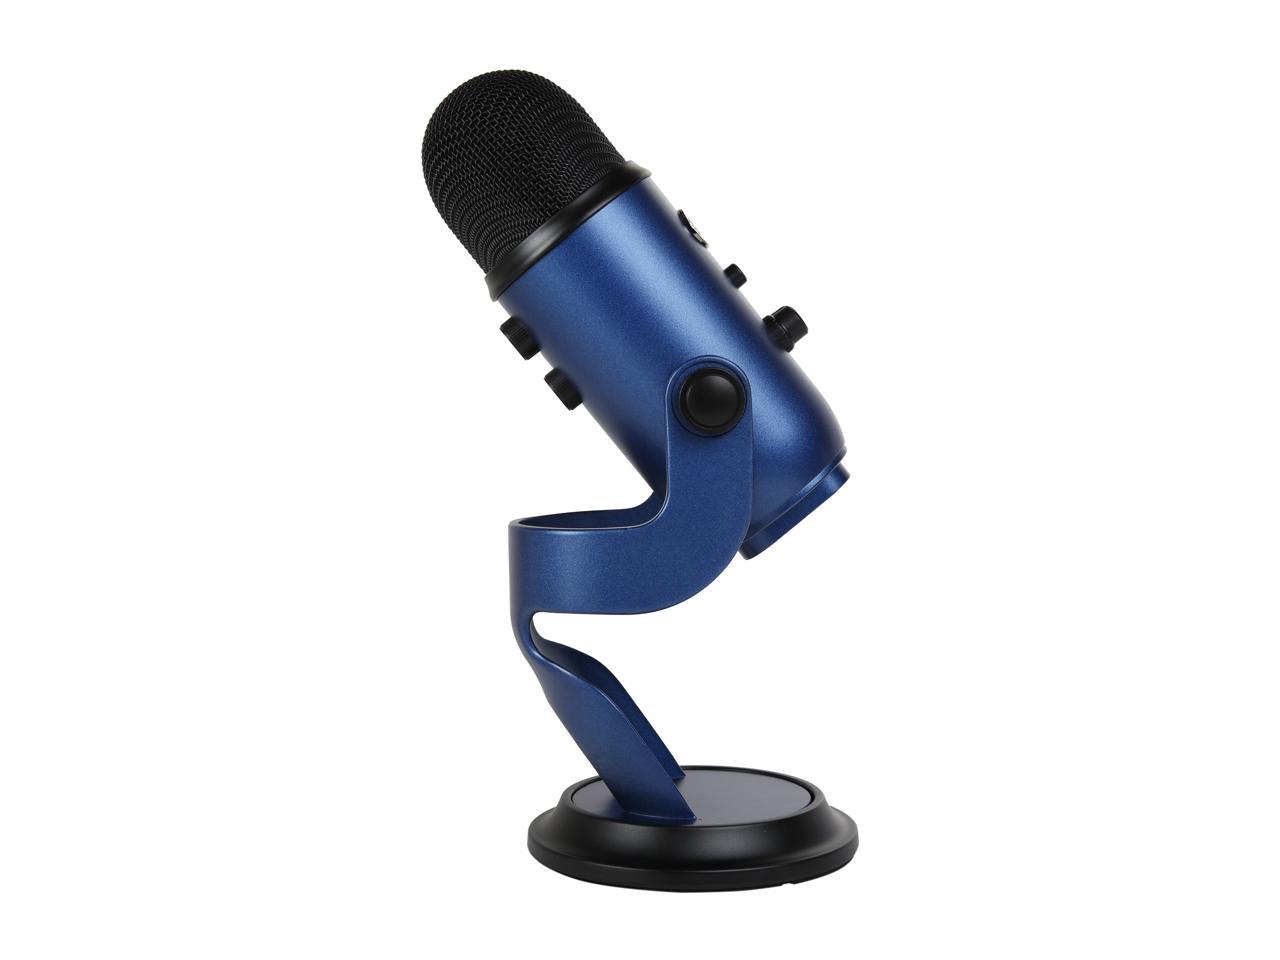 Blue Yeti USB Microphone for PC, Mac, Gaming, Recording, Streaming, Podcasting, Studio and Computer Condenser Mic with Blue VO!CE effects, 4 Pickup Patterns, Plug and Play – Midnight Blue - image 5 of 7